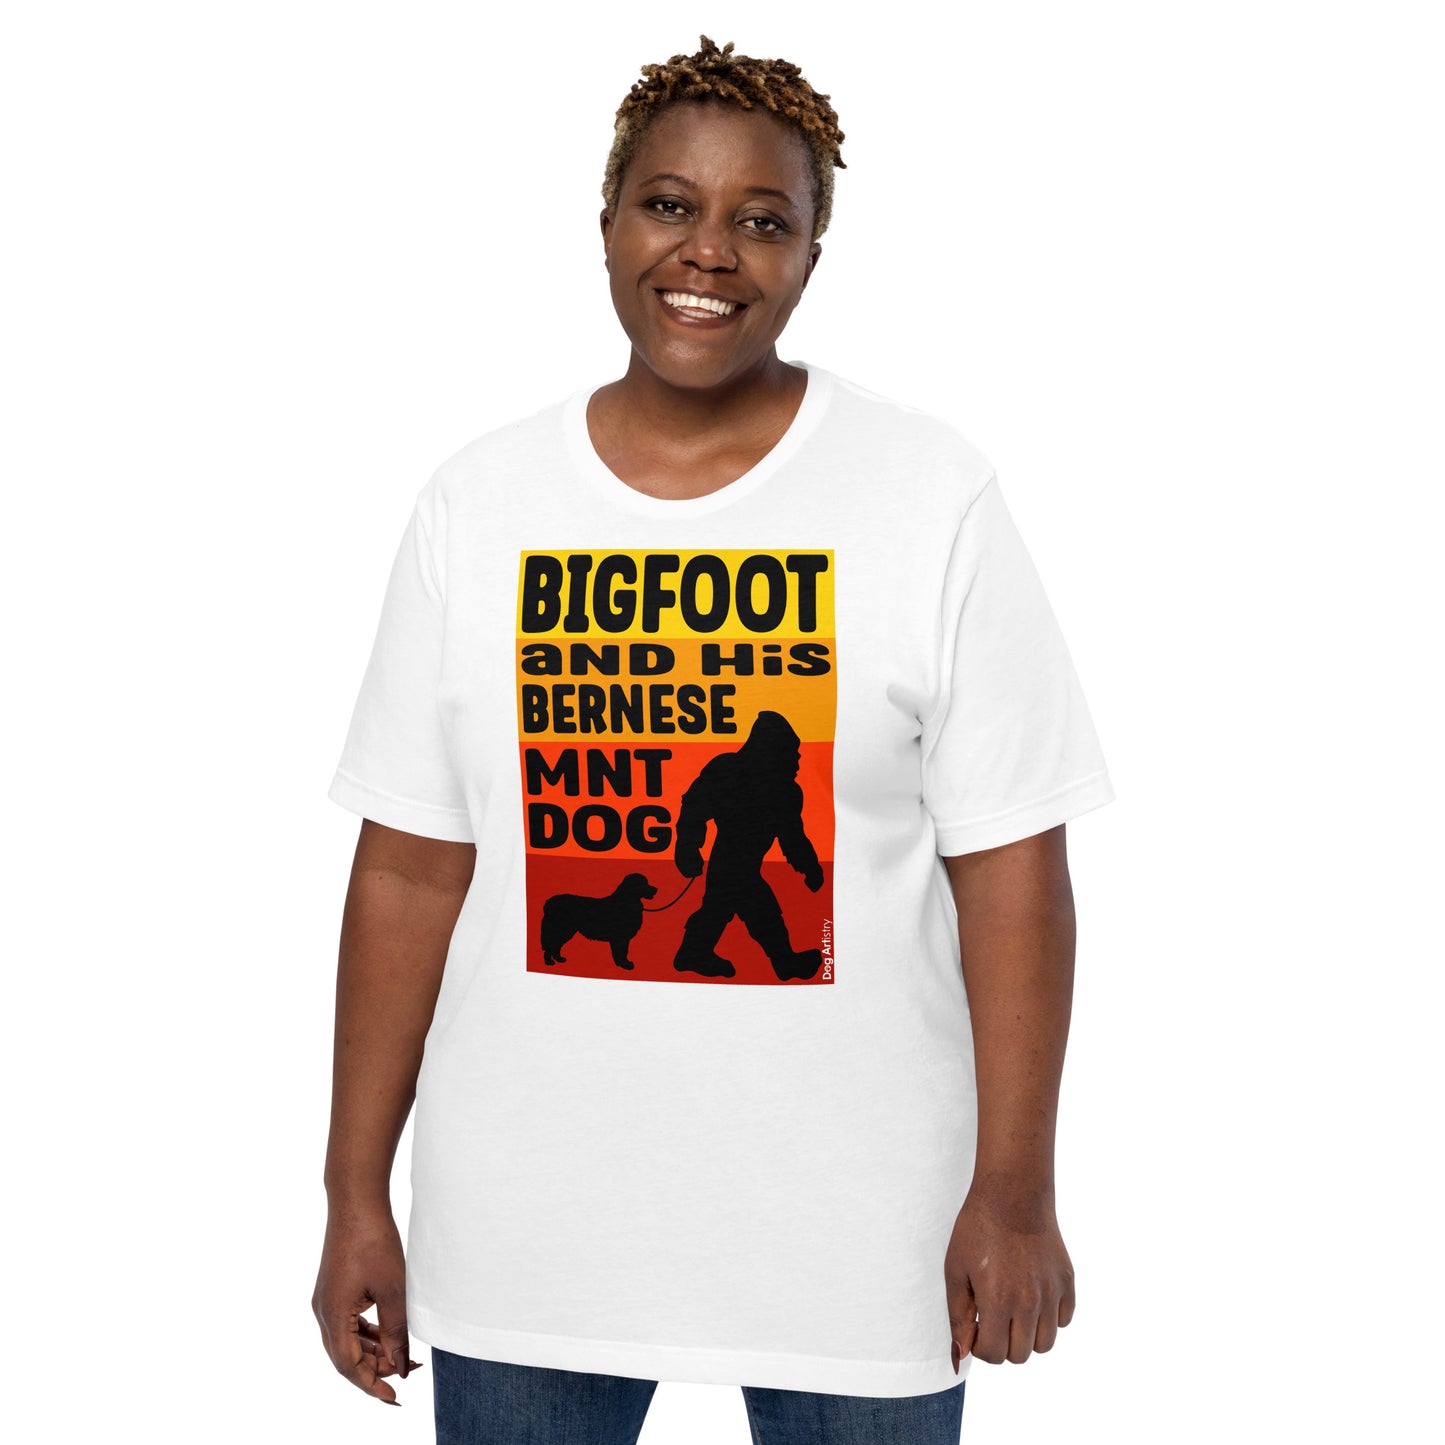 Big foot and his Bernese Mountain Dog unisex white t-shirt by Dog Artistry.